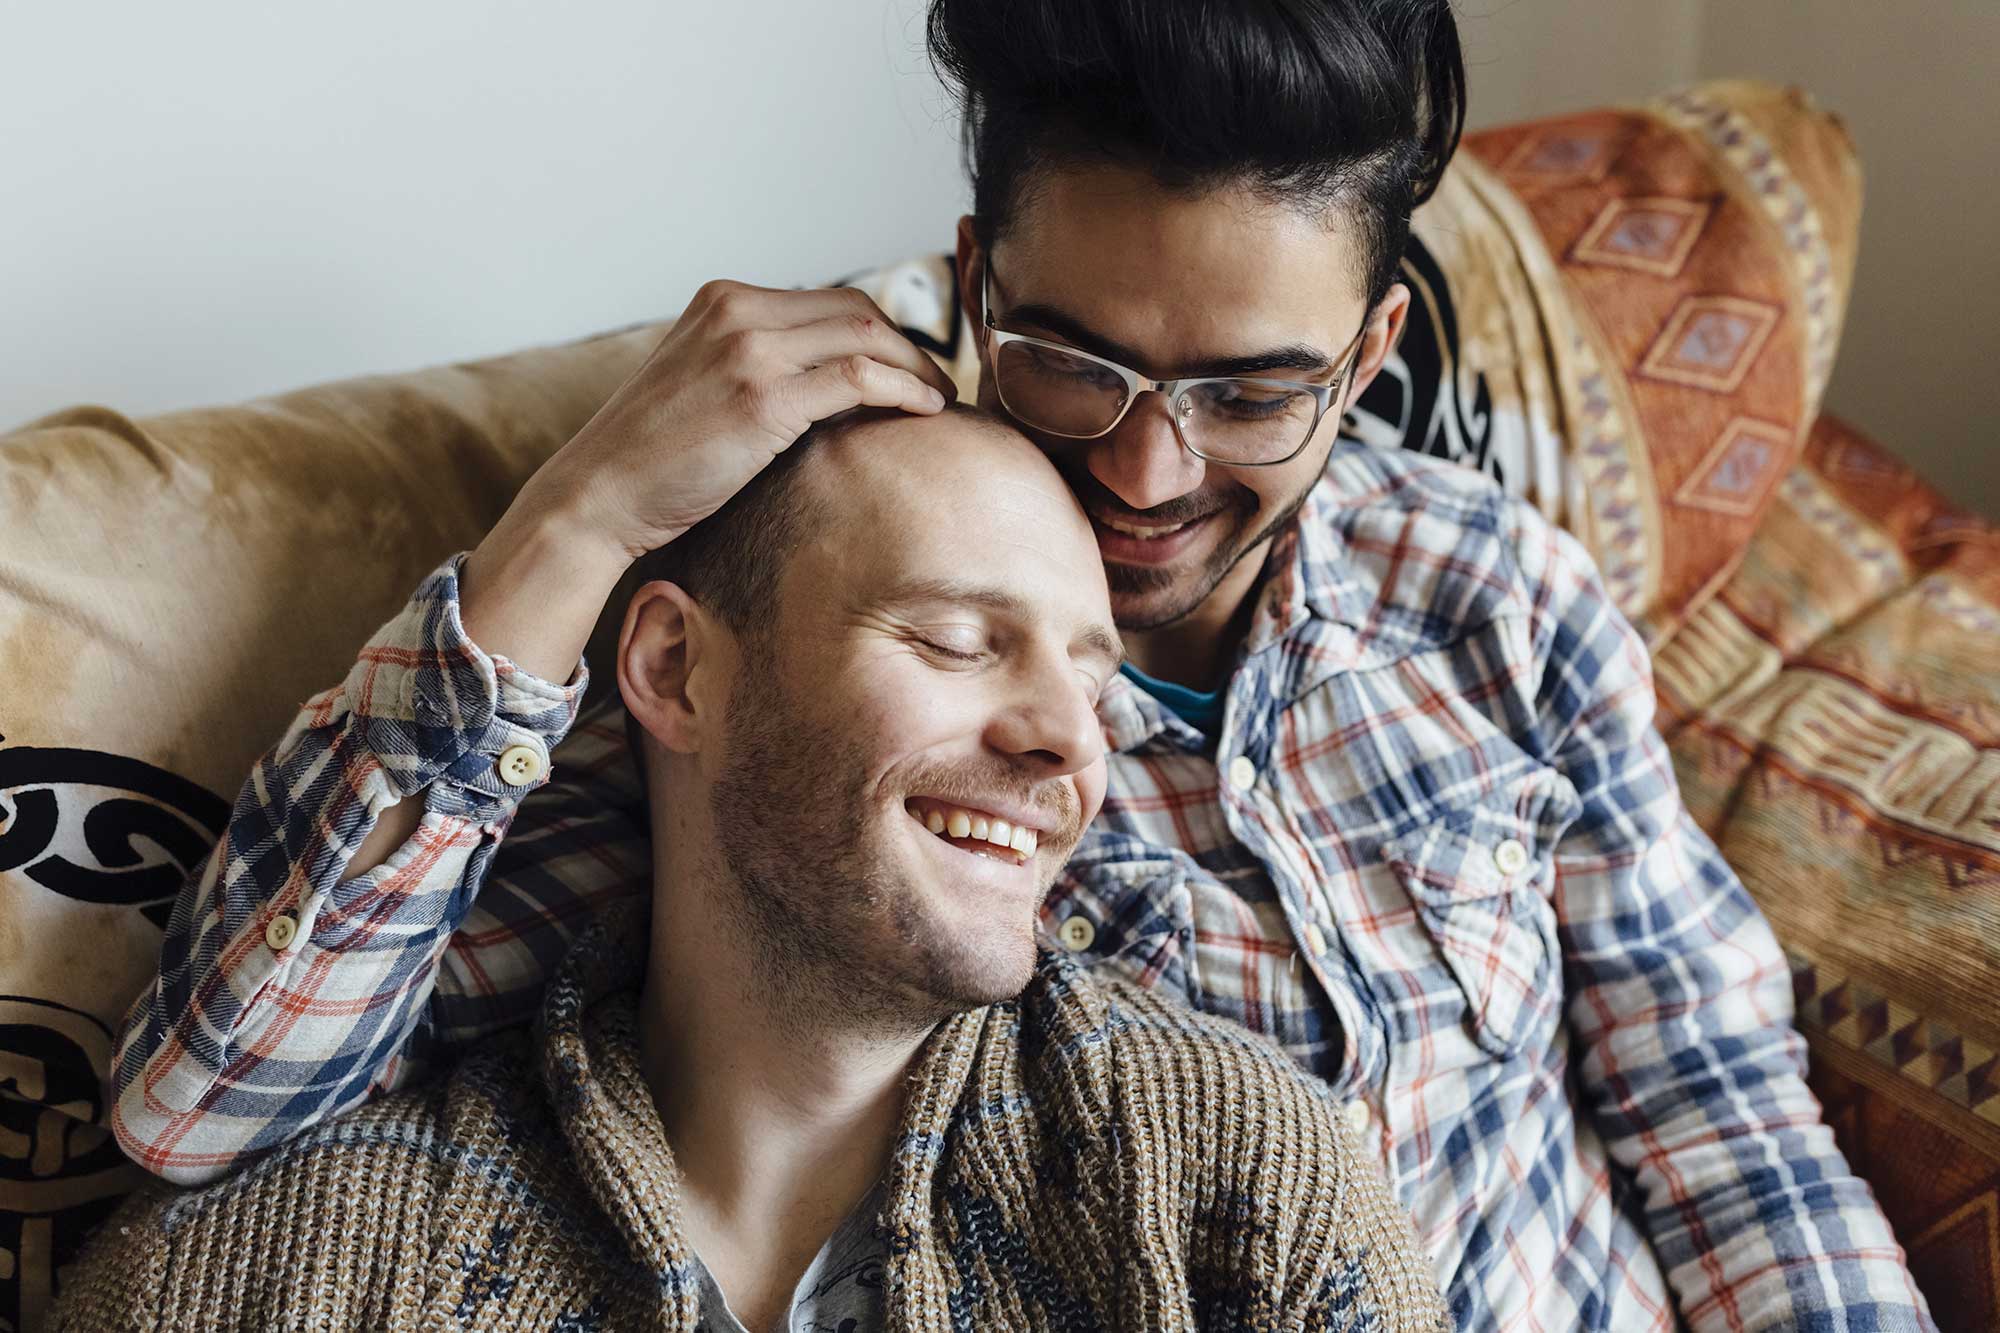 Joyful gay male couple embracing on a couch